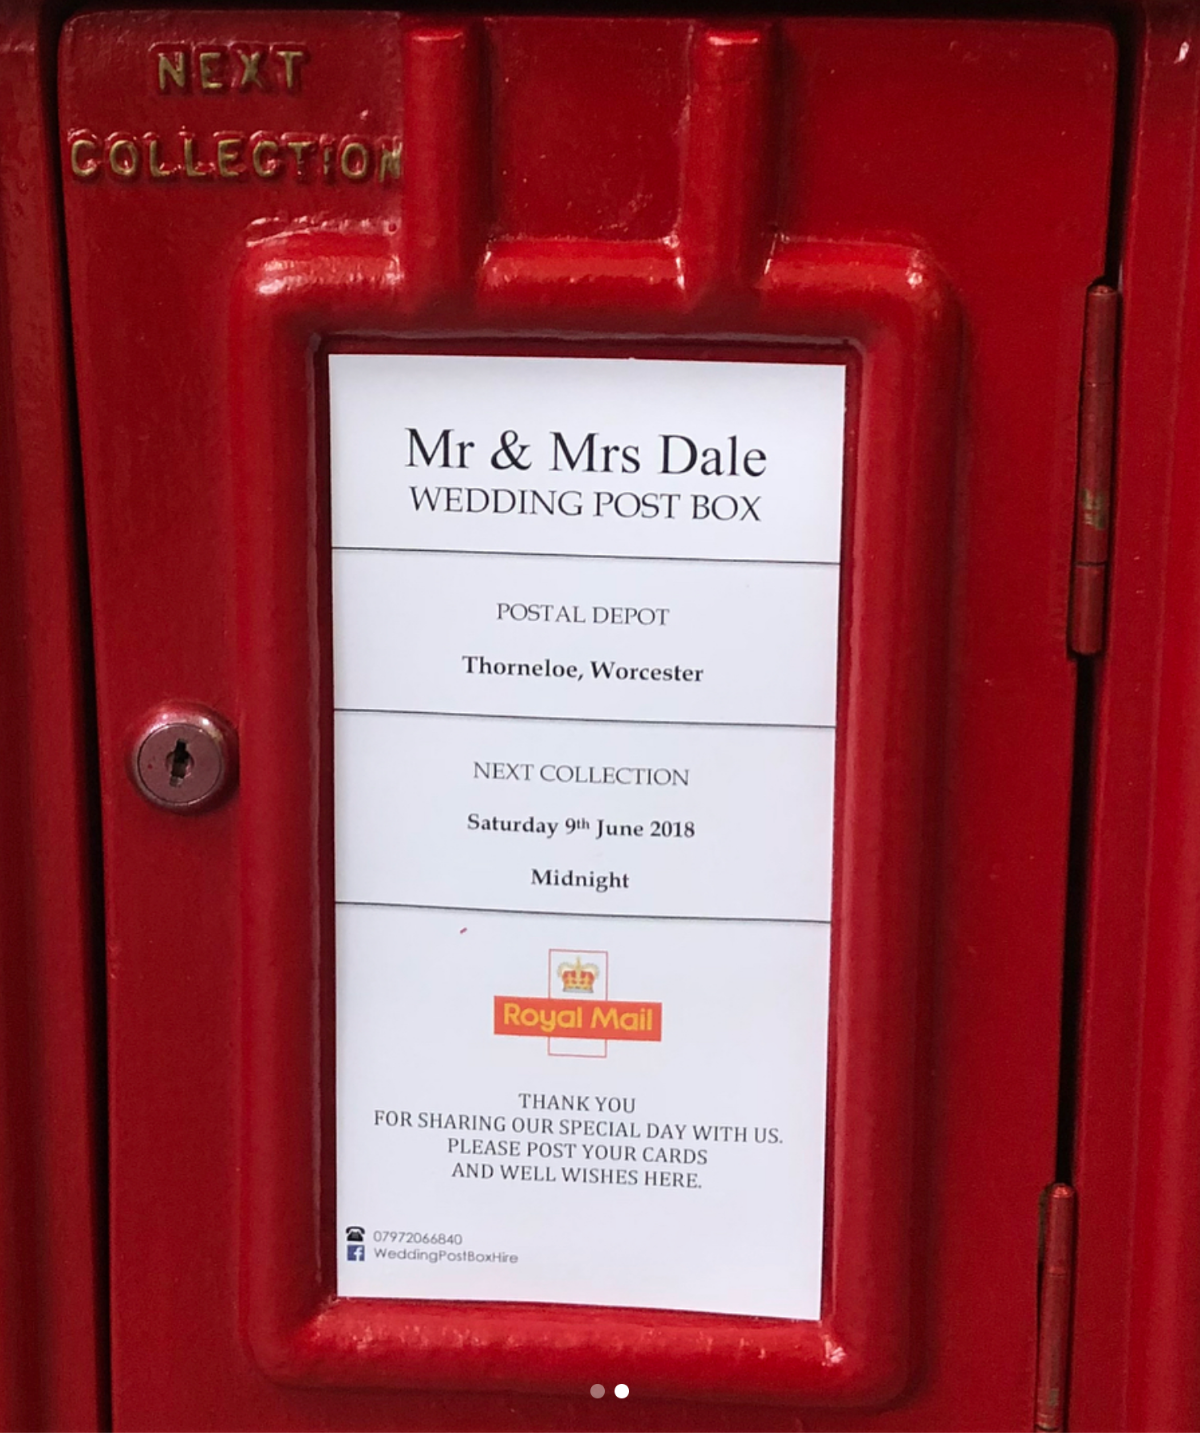 Insert design chosen by Tim and Garbriella. They preferred having the Mr & Mrs over their full names